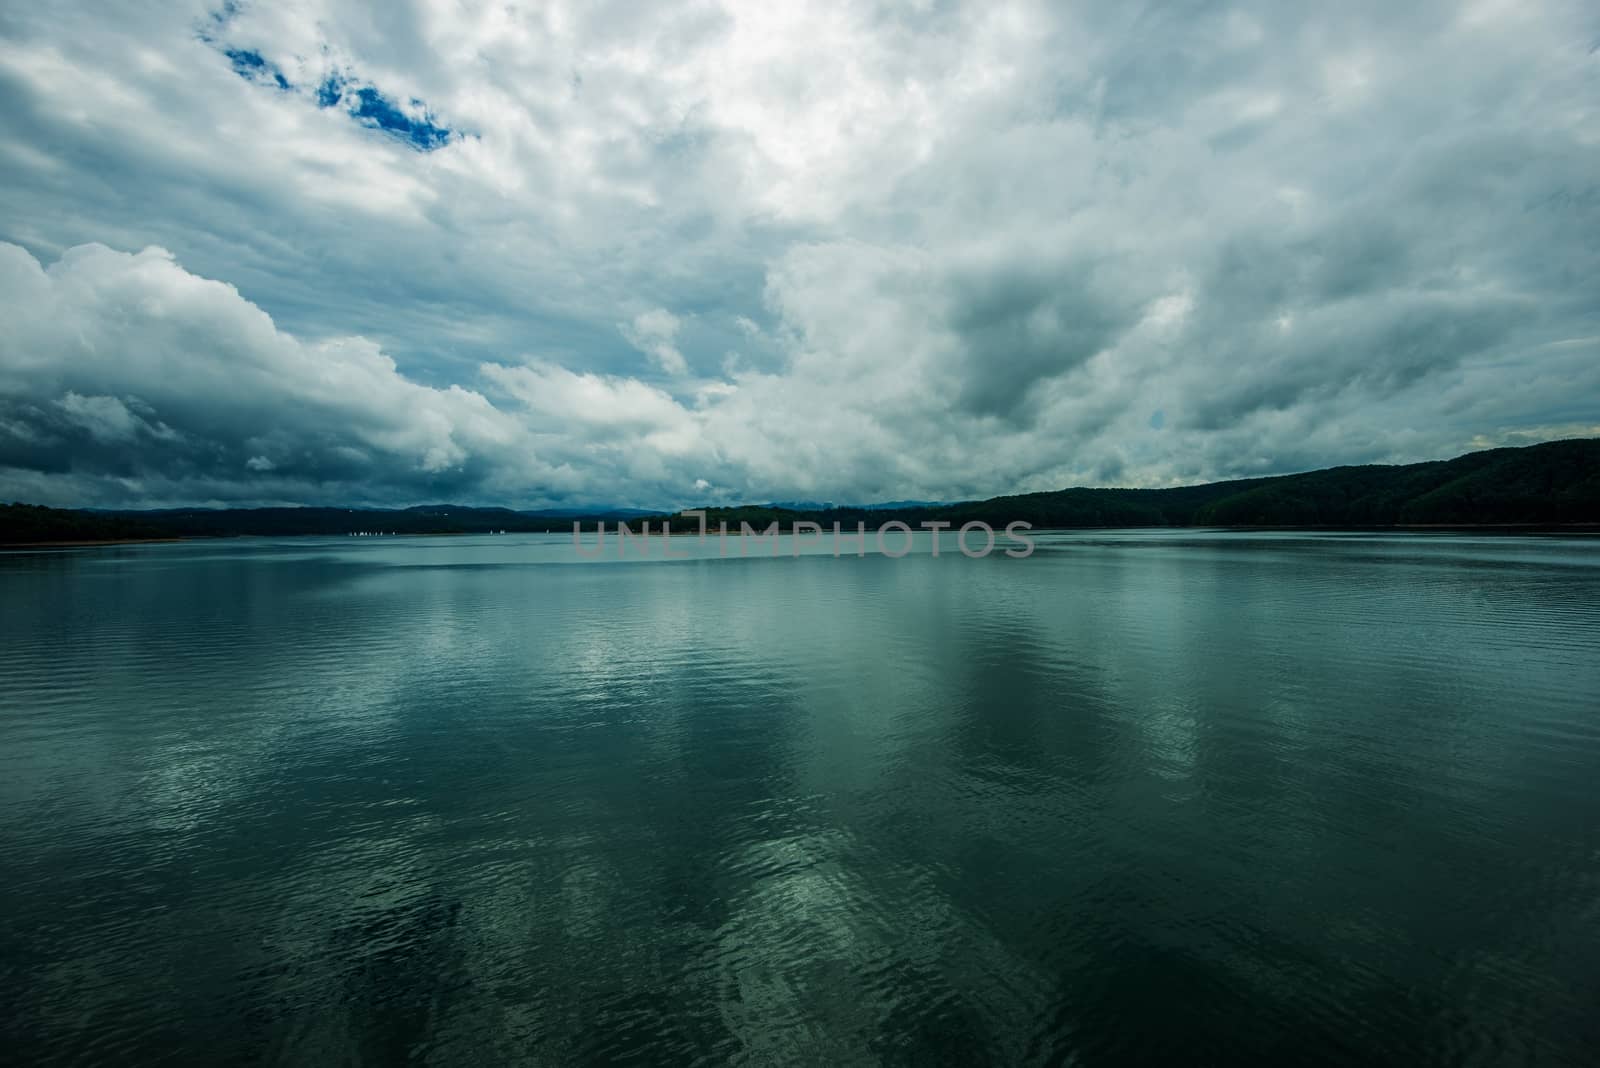 Stormy Lake Scenery by welcomia